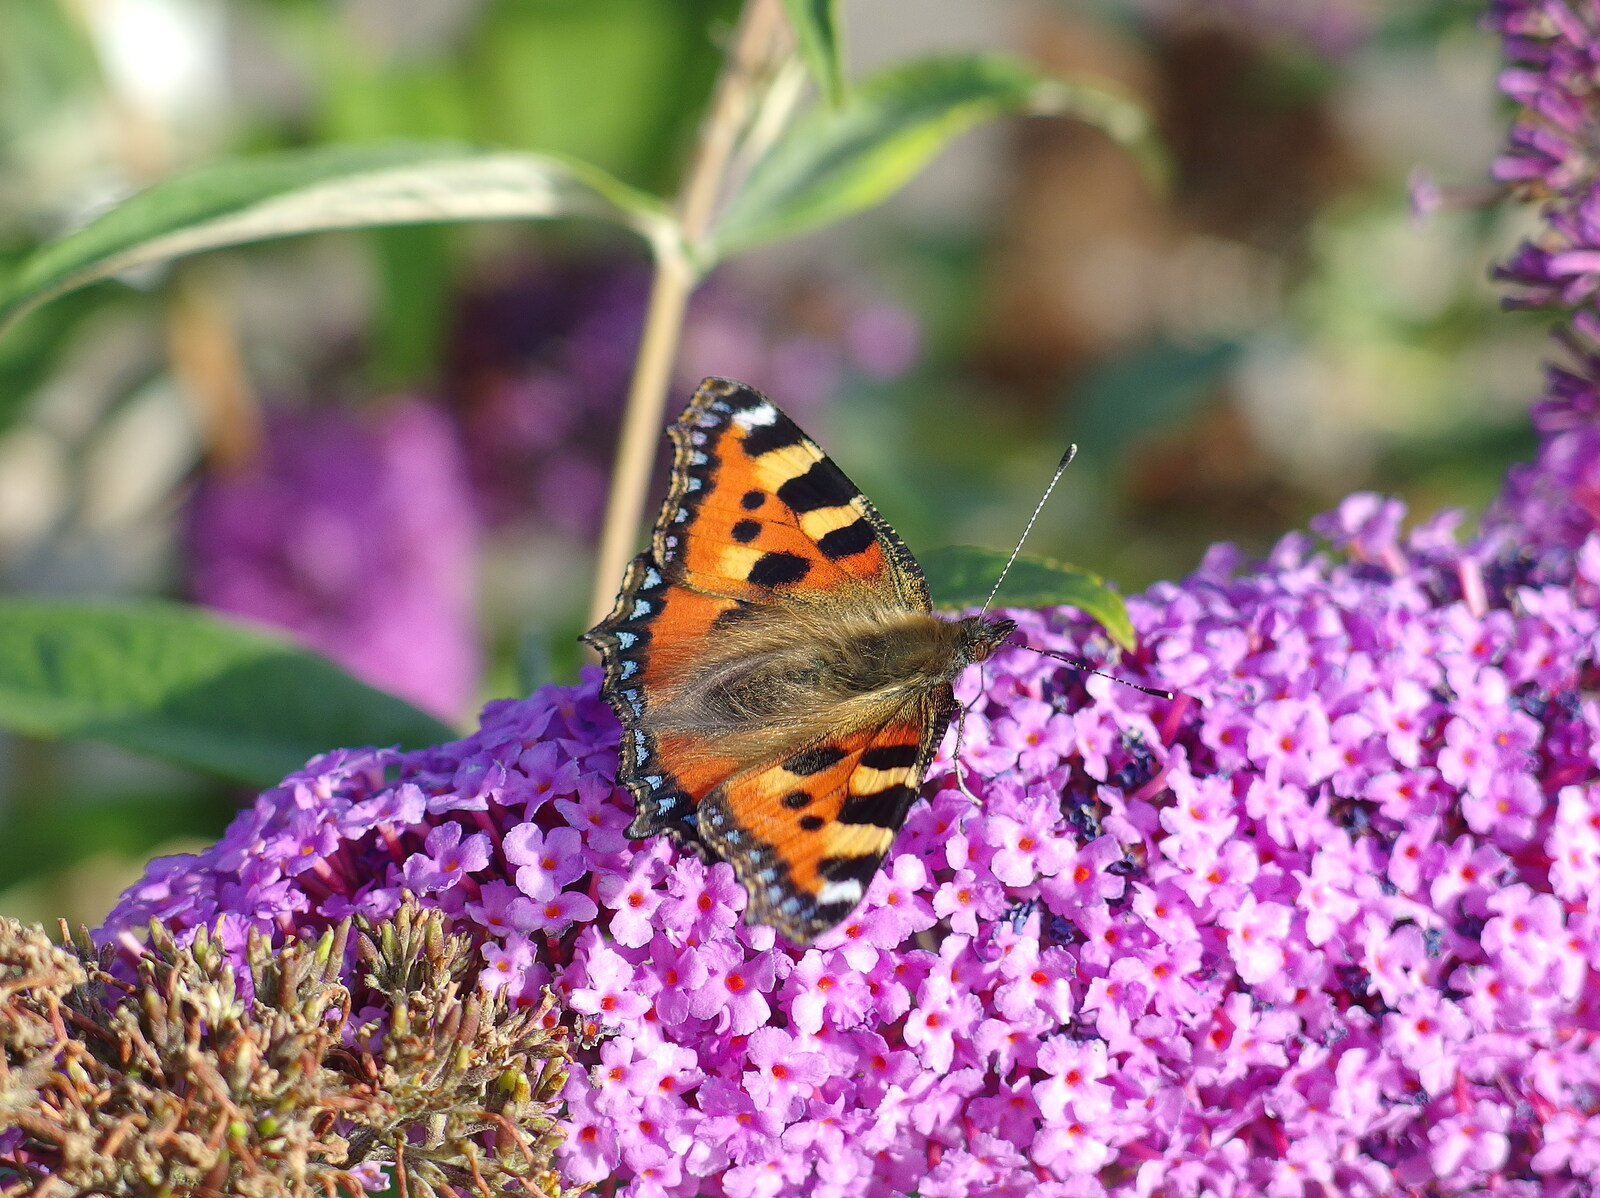 A butterfly on the buddleia at Diss station from A Giant Sand Pile, and a Walk at Thornham, Suffolk - 17th August 2013